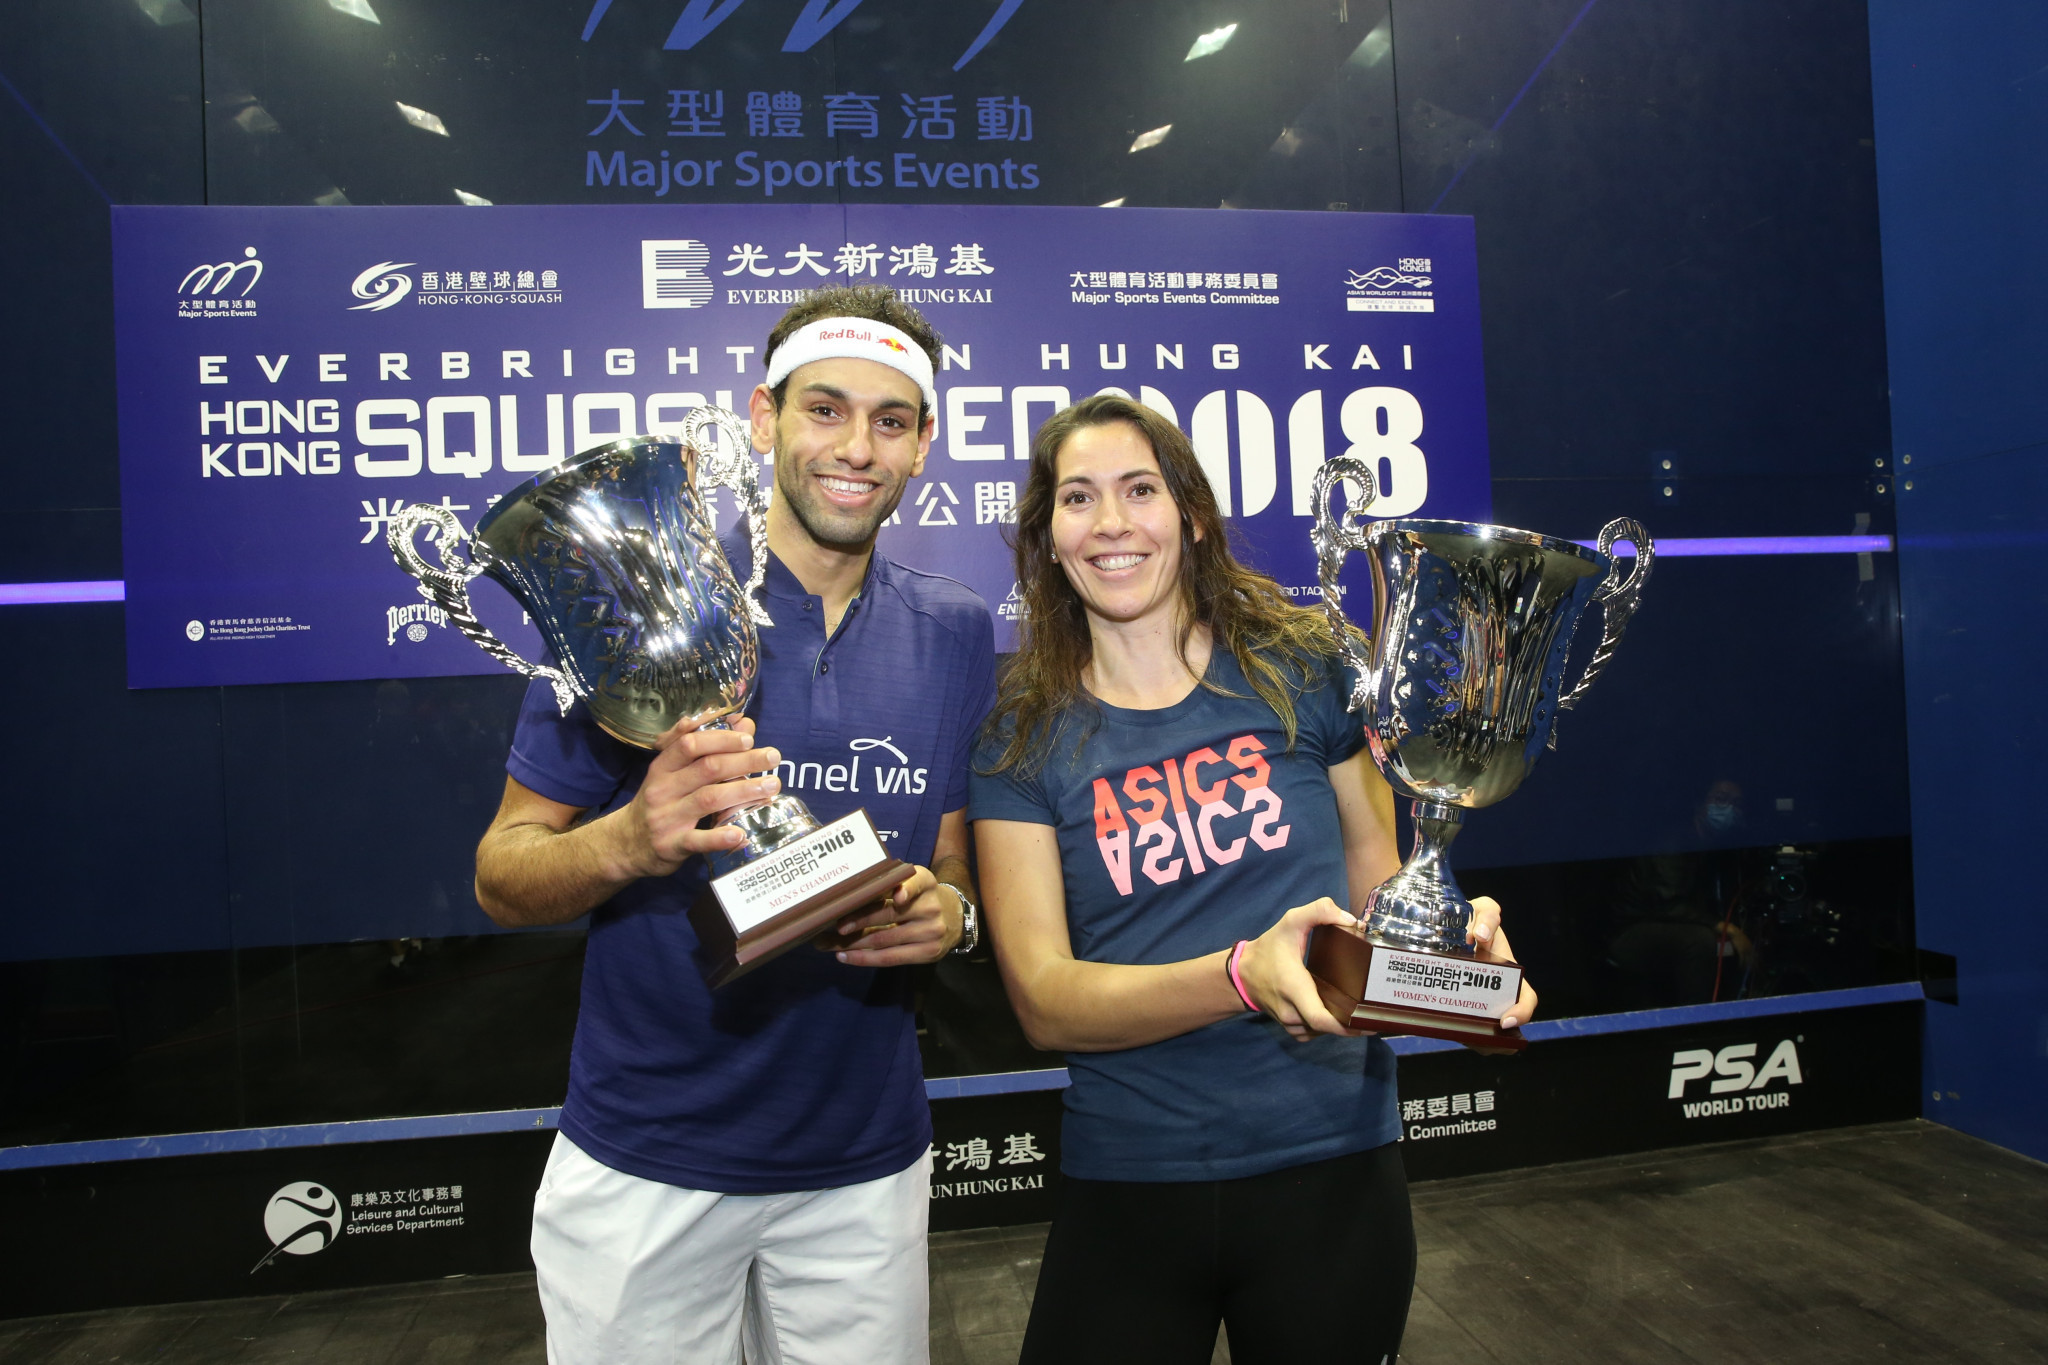 The Everbright Sun Hung Kai Hong Kong Squash Open was last held in 2018 ©PSA